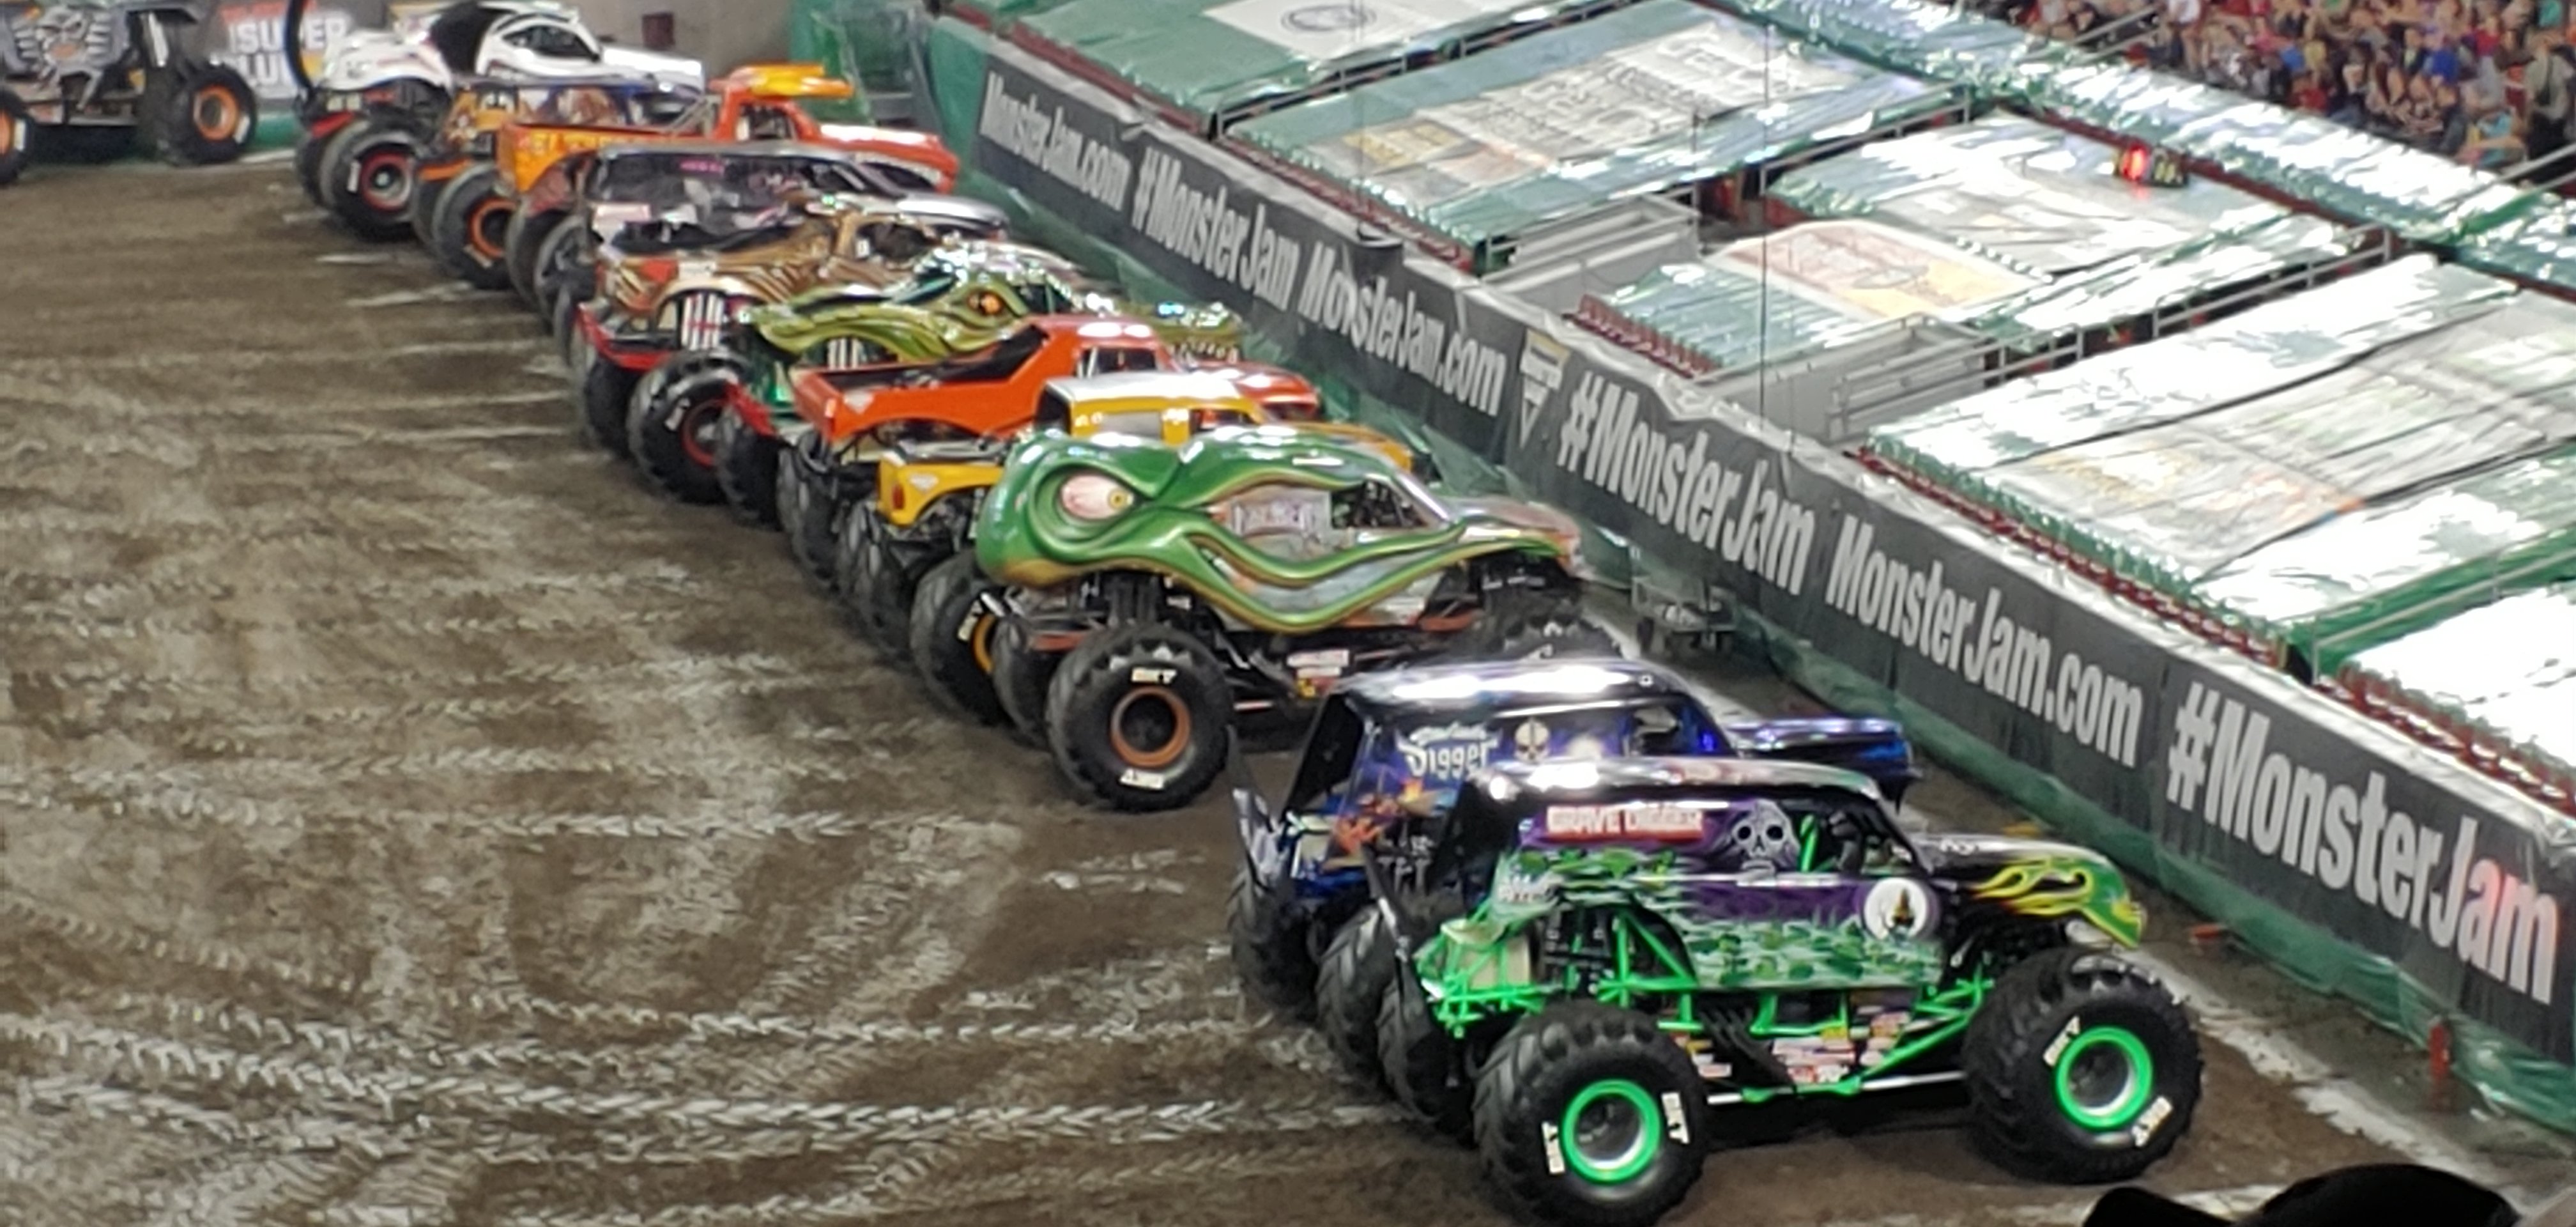 Monster Jam fun rolls into Orlando Florida after an awesome show in Tampa -  2 Boys + 1 Girl = One Crazy Mom